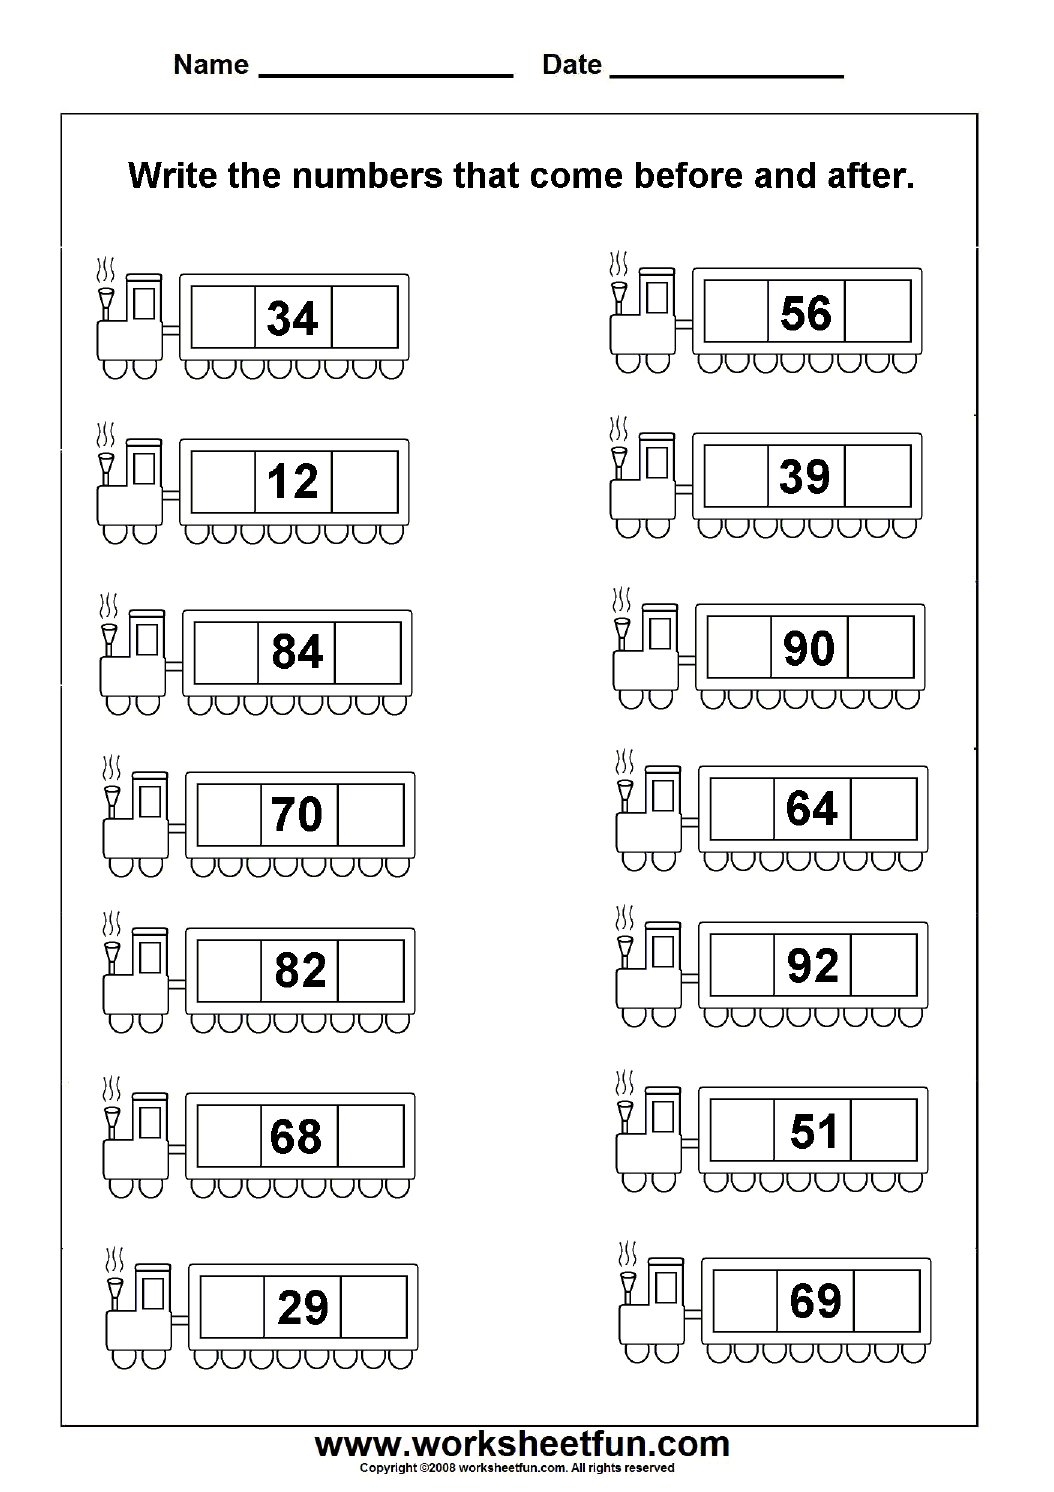 Before &amp;amp; After Numbers - 2 Worksheets | Printable Worksheets | Math - Free Printable Hoy Sheets